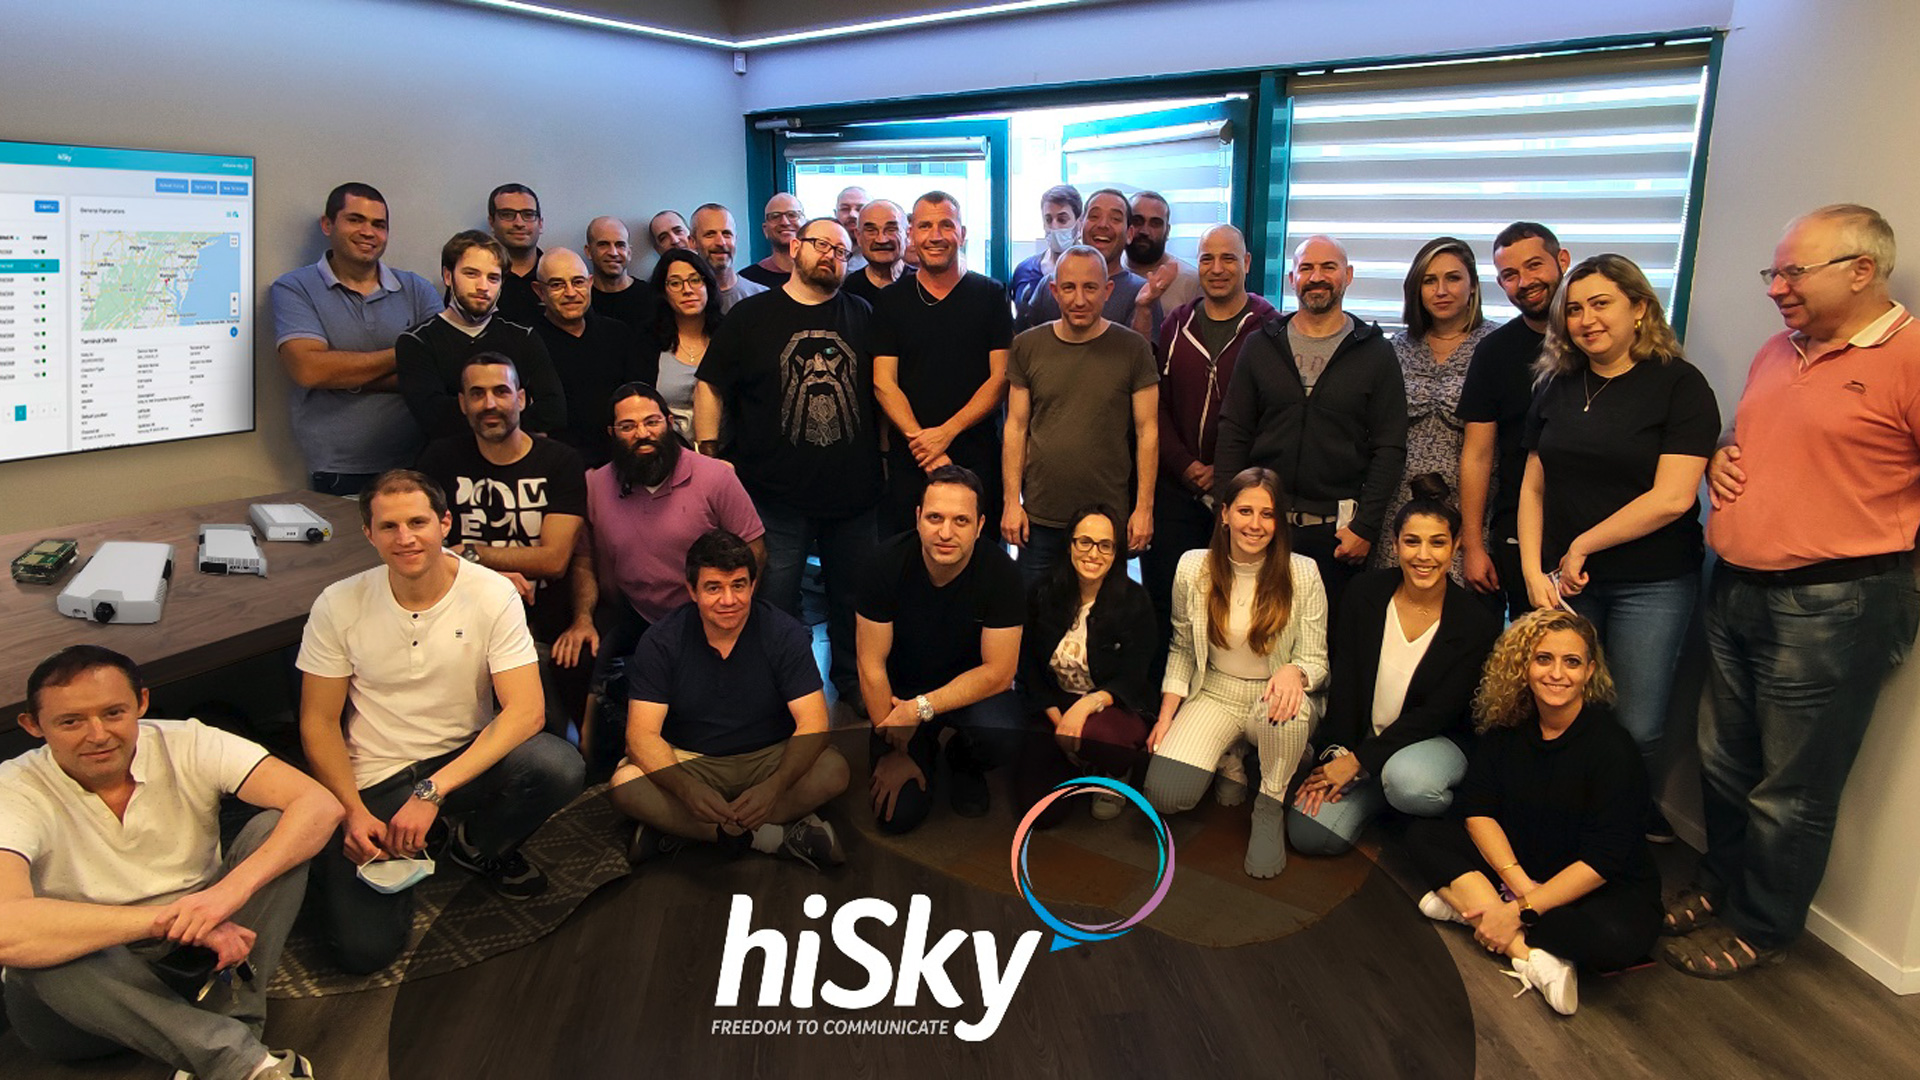 hiSky raised $30M Series A funding, led by ST Engineering